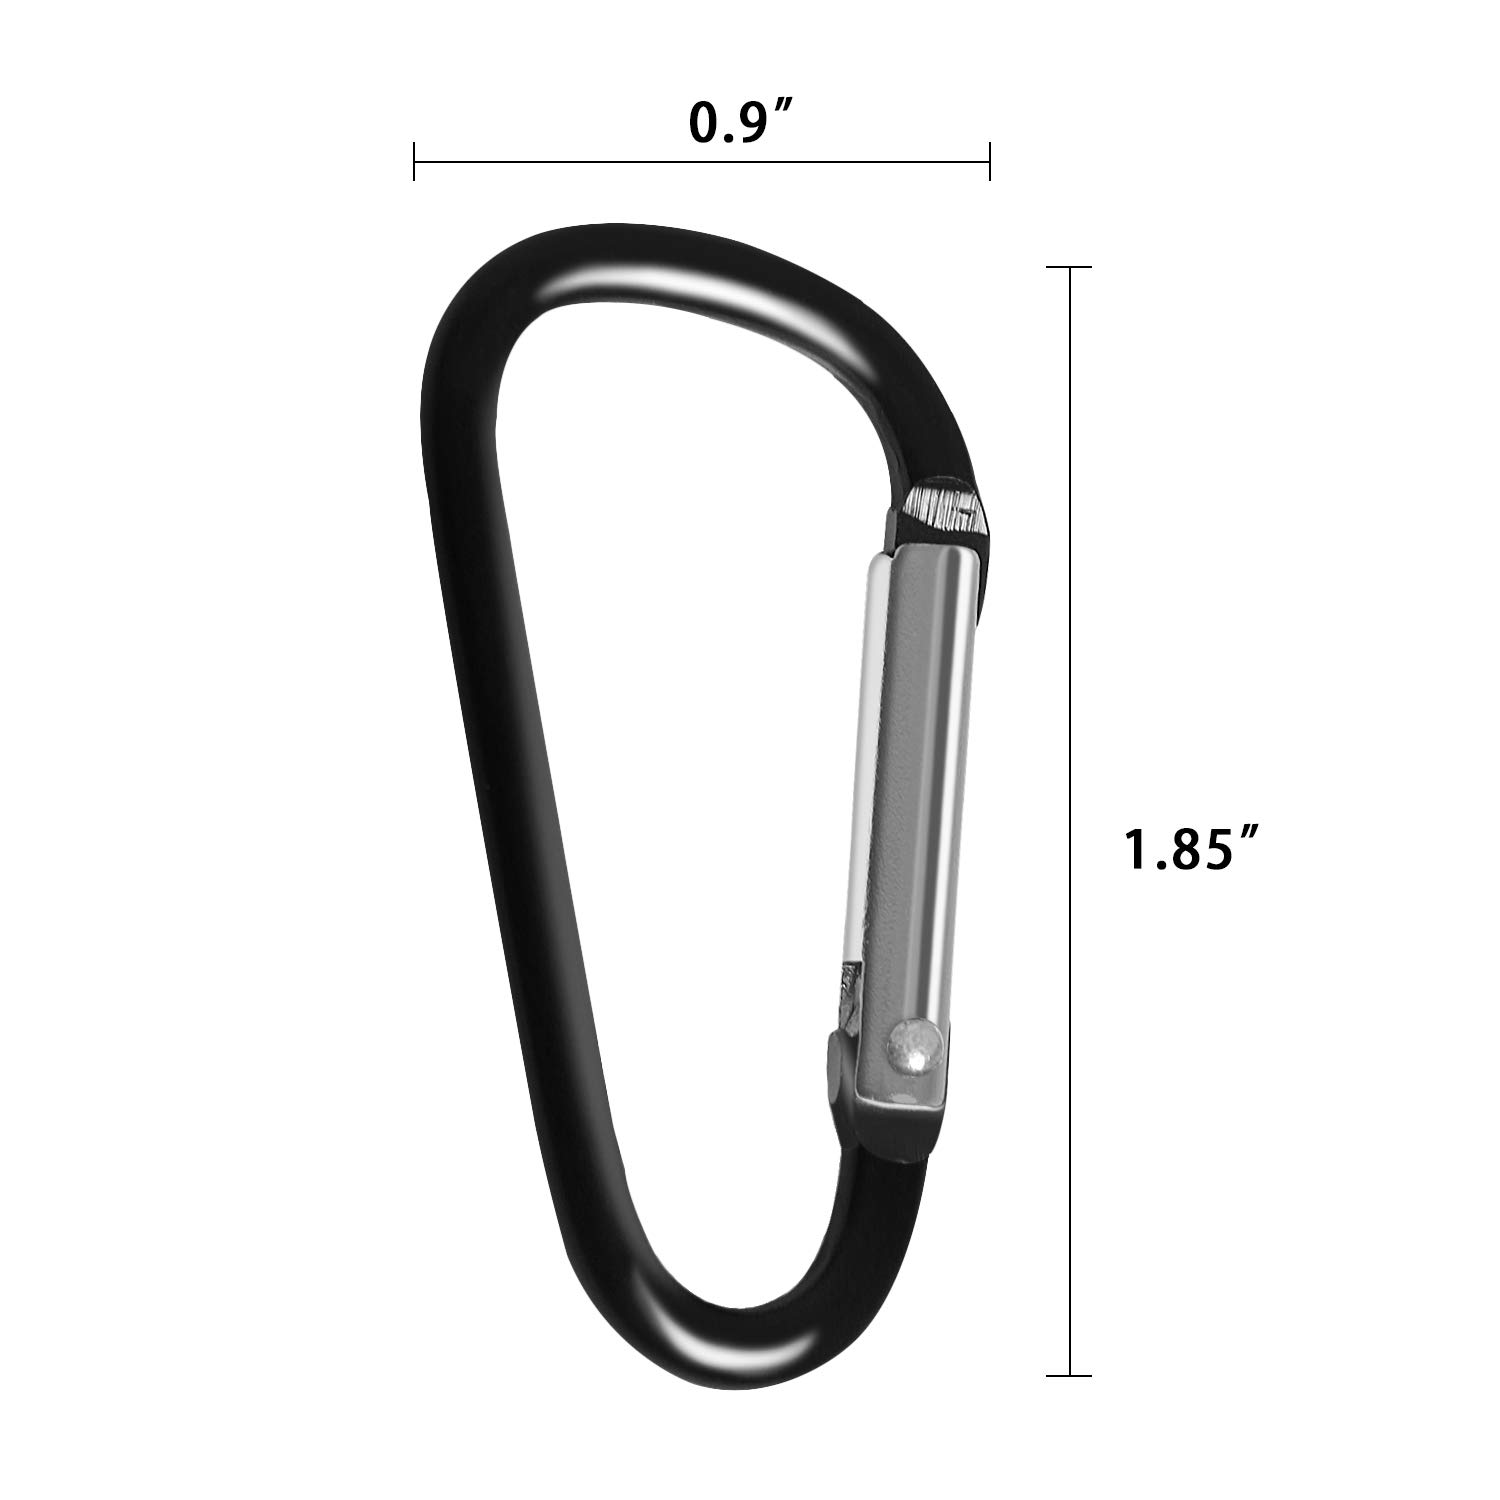 UPINS 100Pcs Carabiner Clips, Aluminum Locking Spring Hook Keychain D Shape Heavy Duty Buckle Pack Carabiners Clip Lock Snap Hooks Backpack Clip